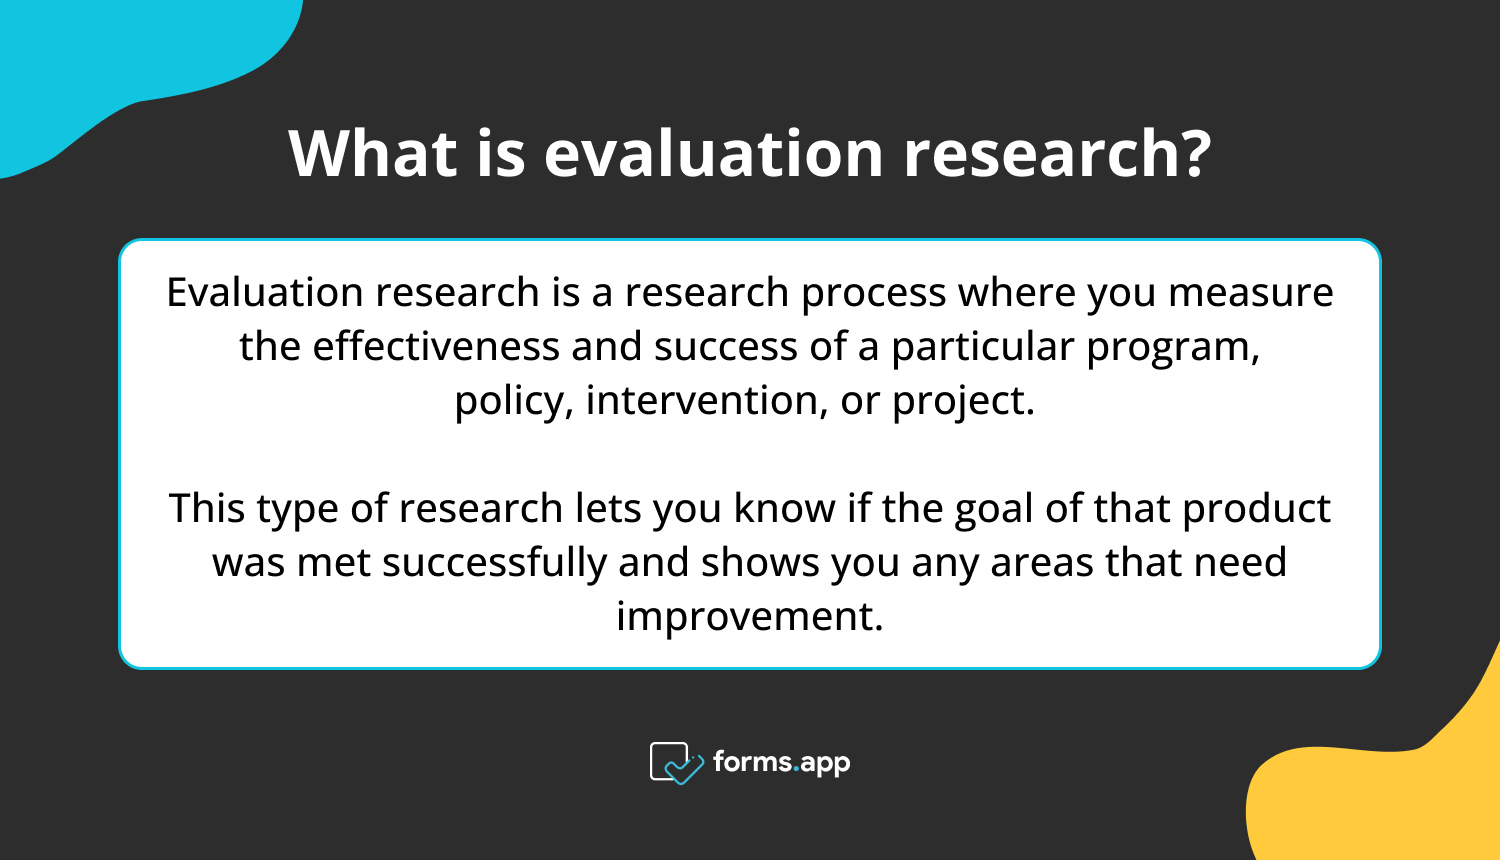 What is evaluation research?